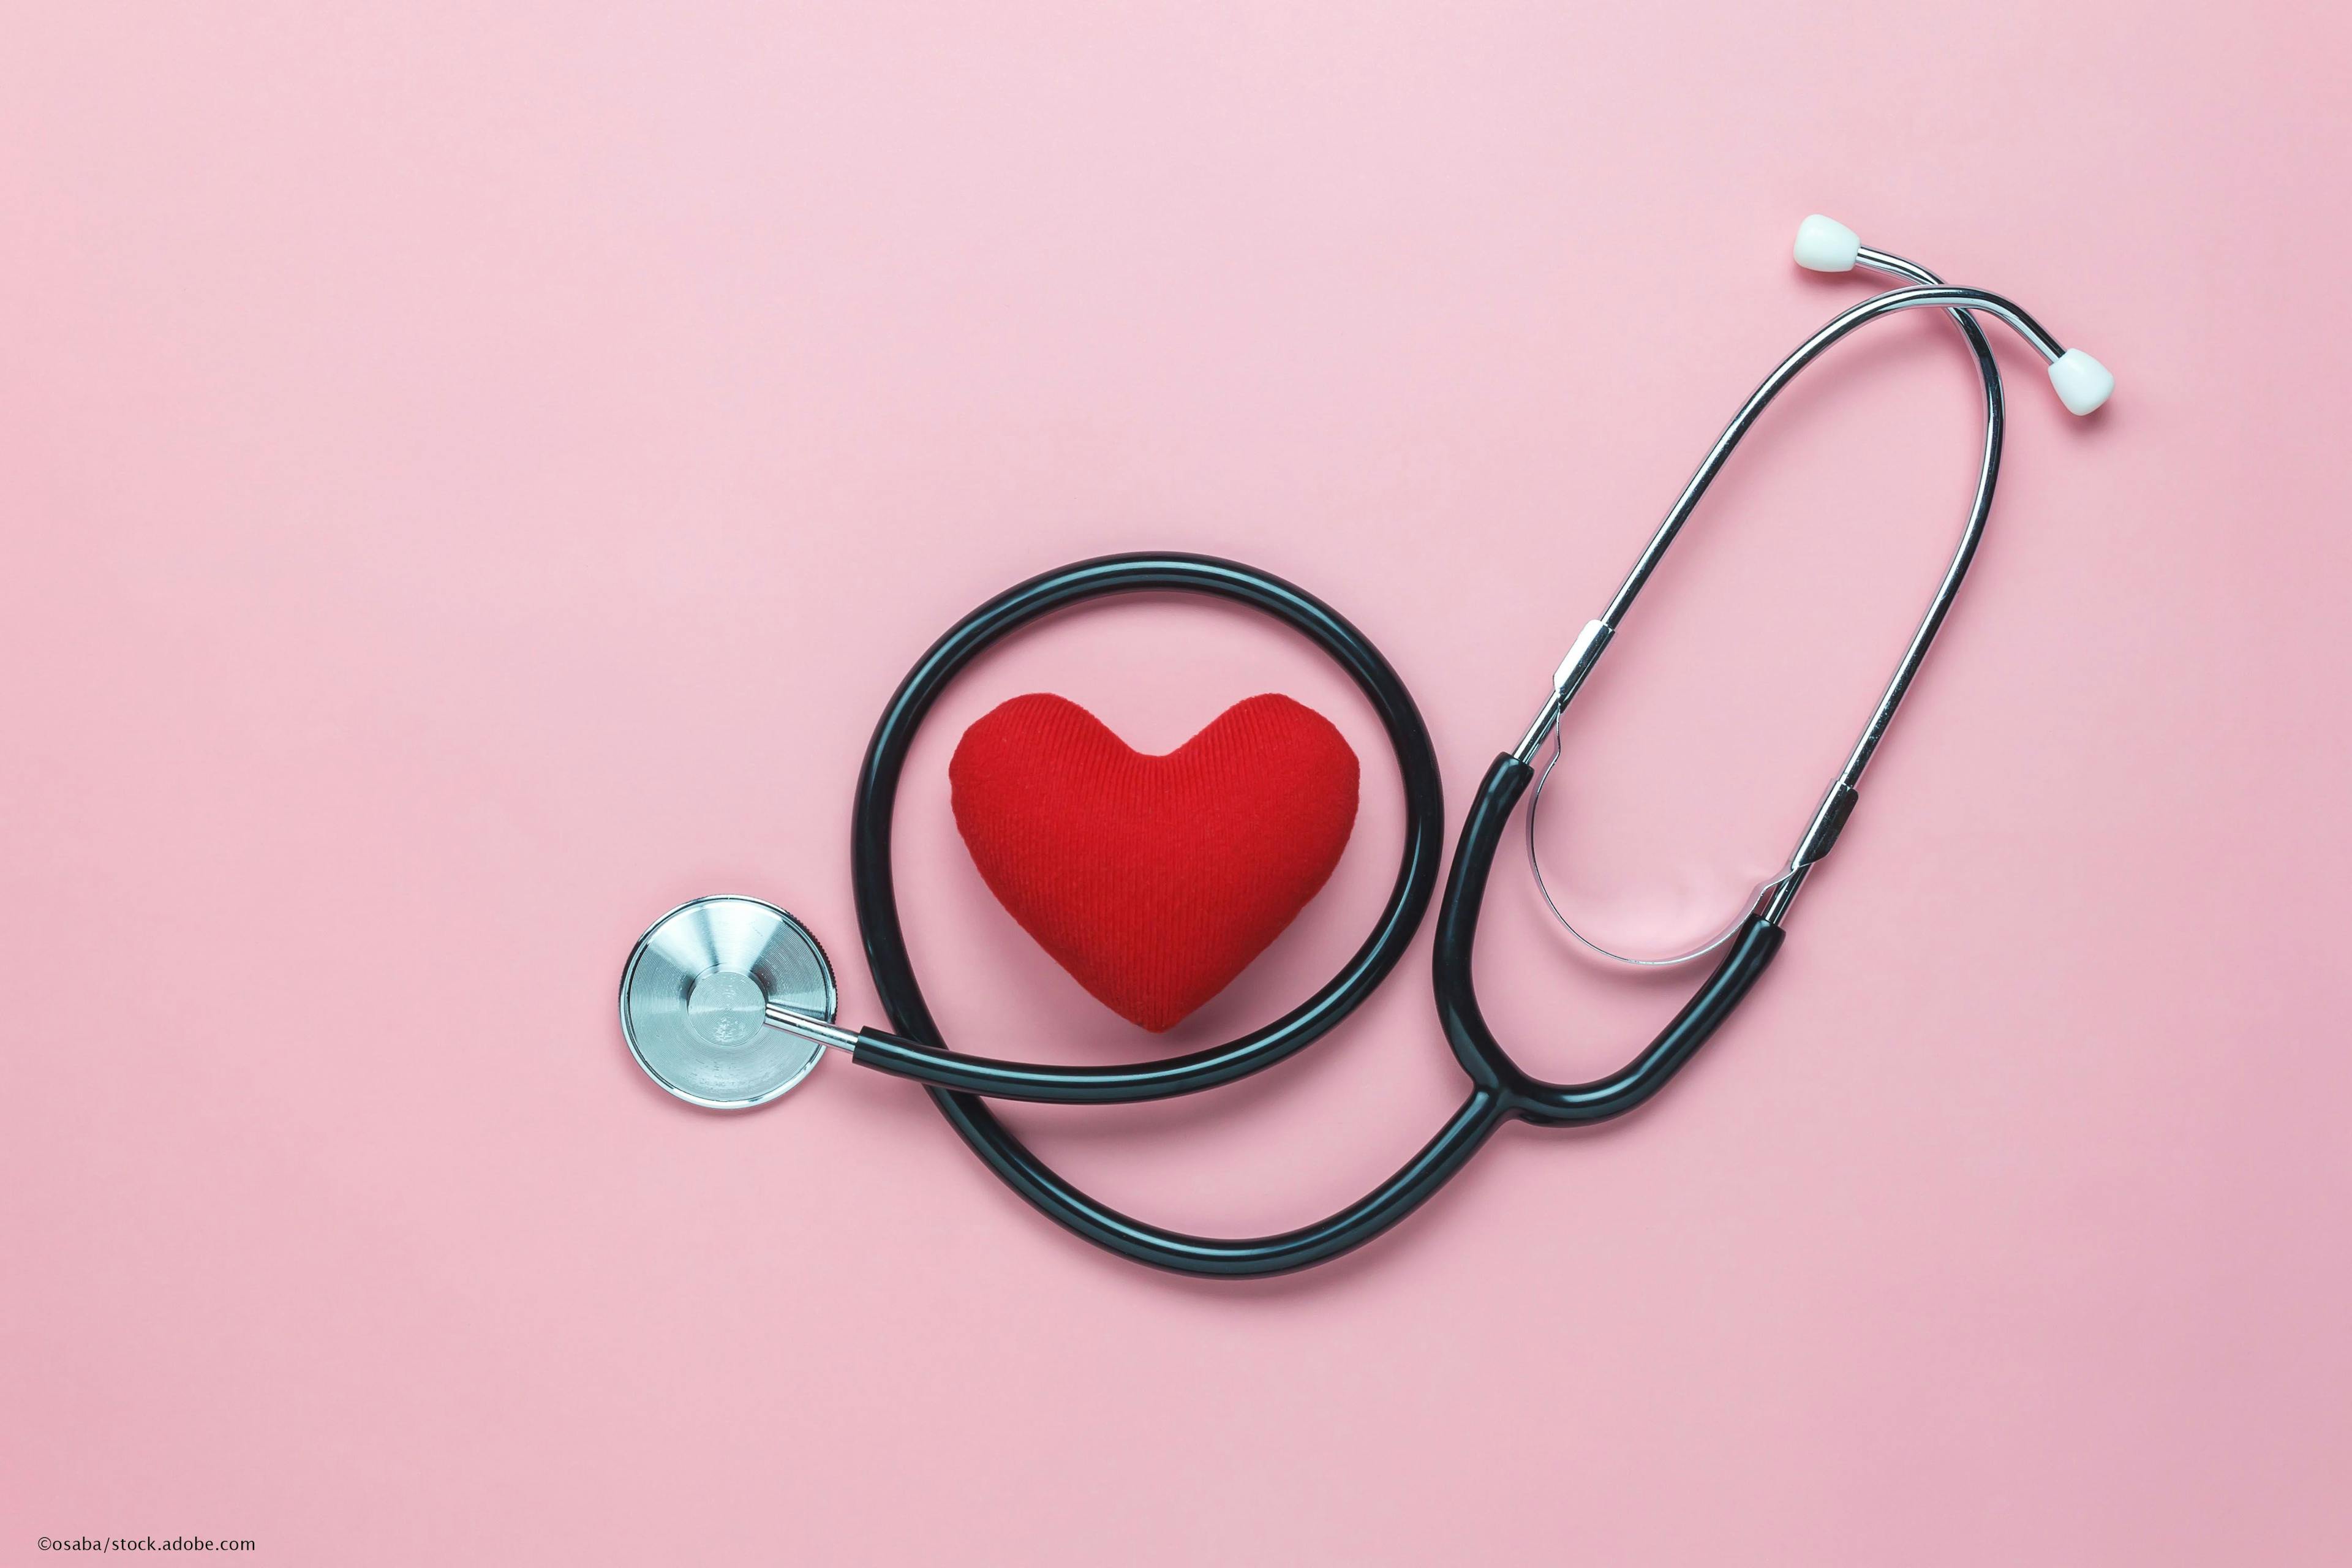 Valentine's Day, work-life balance, physician, relationships, romance